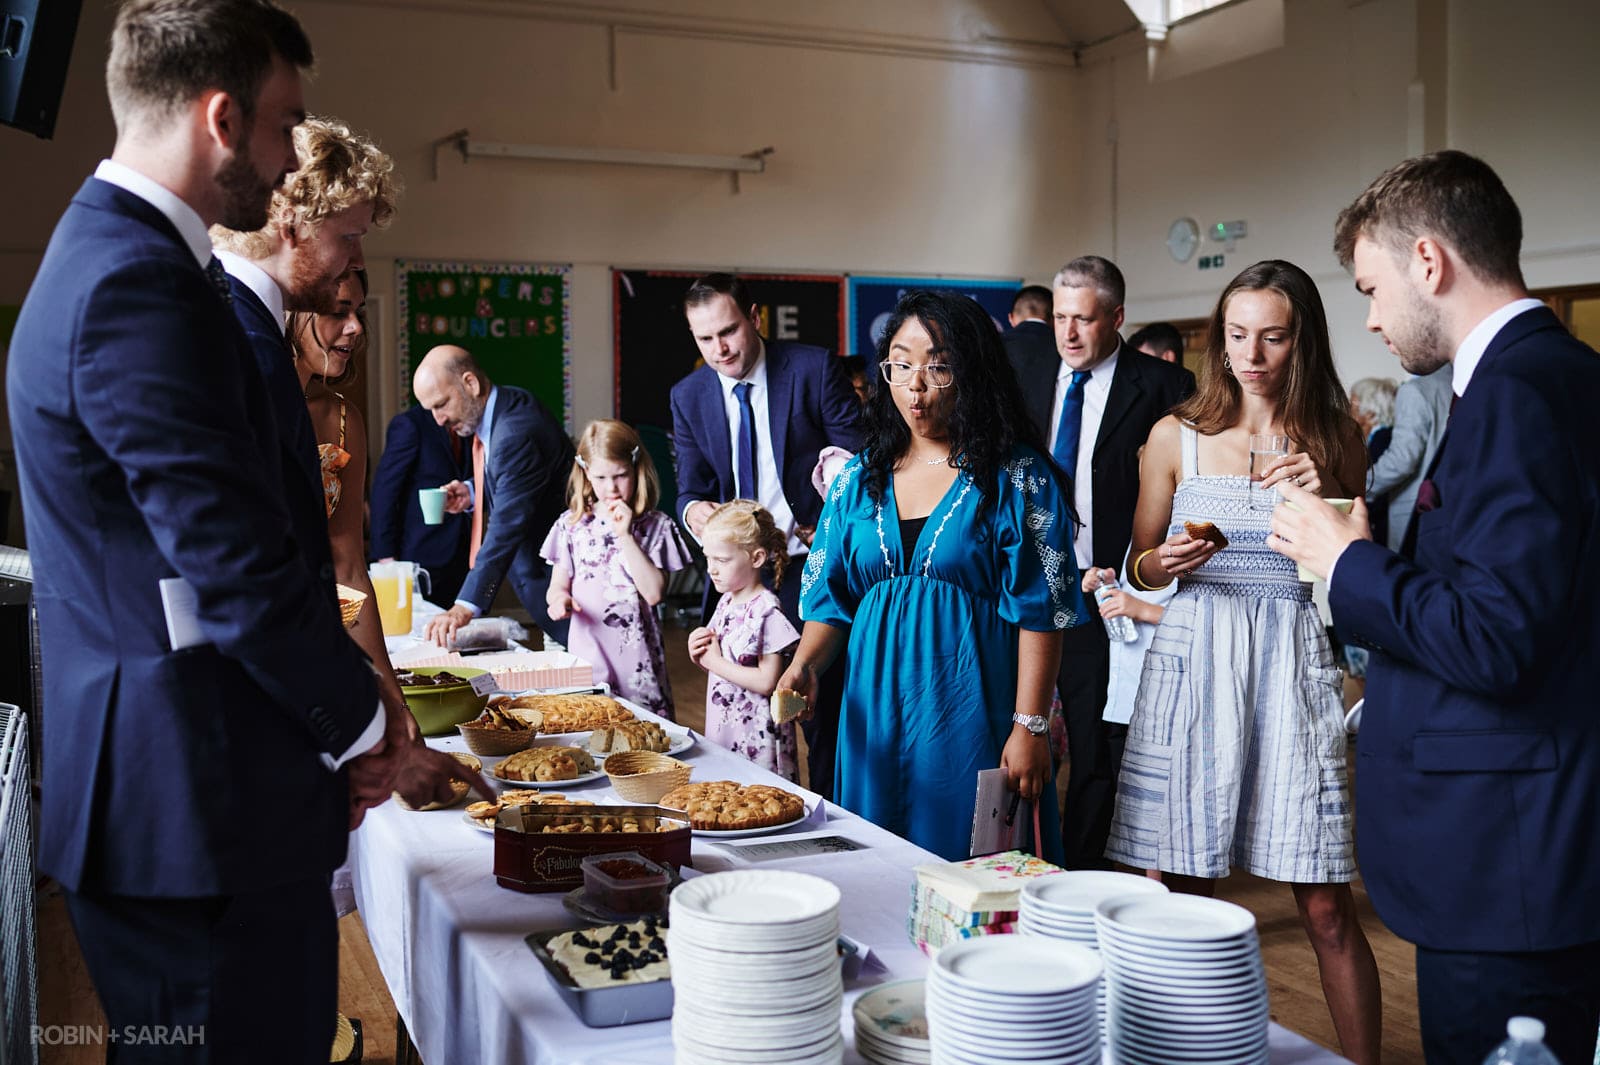 Guests choose from variety of cakes after wedding ceremony